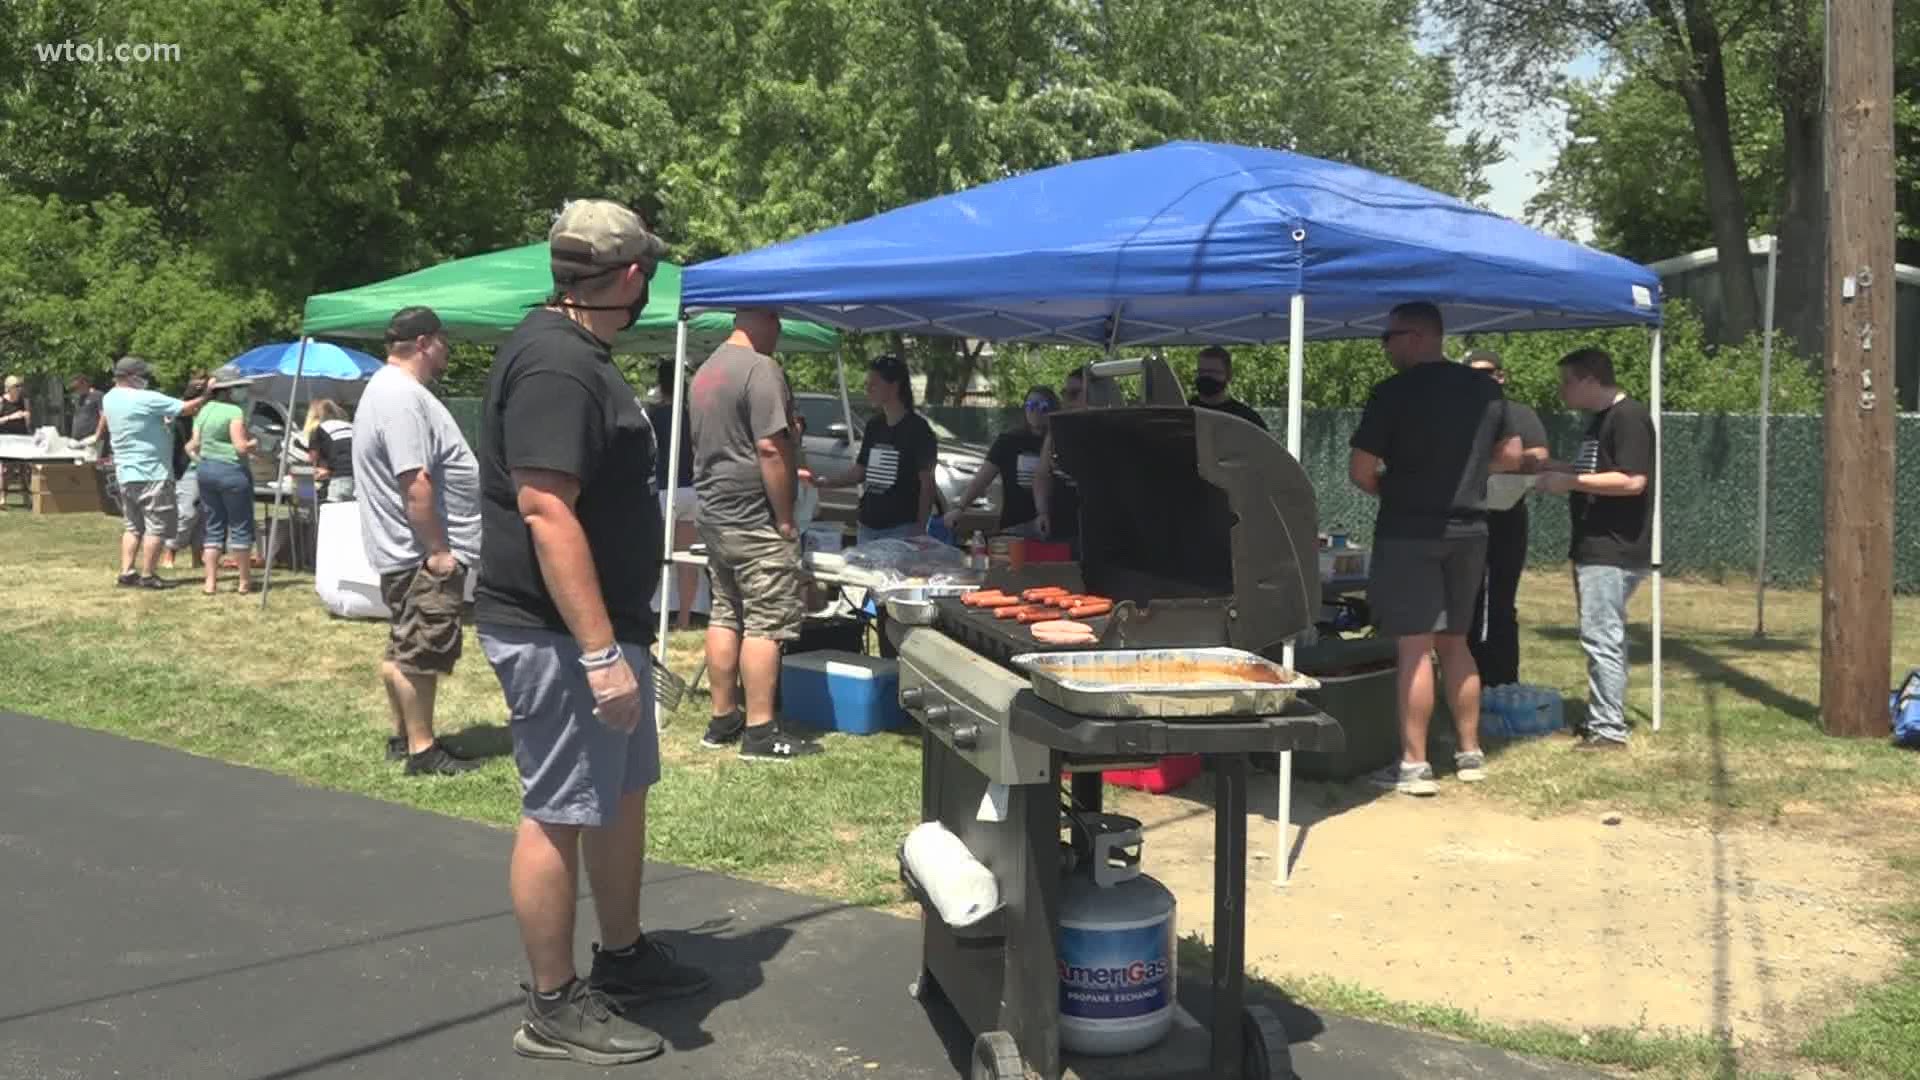 Toledo community continues to show support for Officer Anthony Dia. Two weeks following his death, family and former coworkers honor his life by holding a cookout.